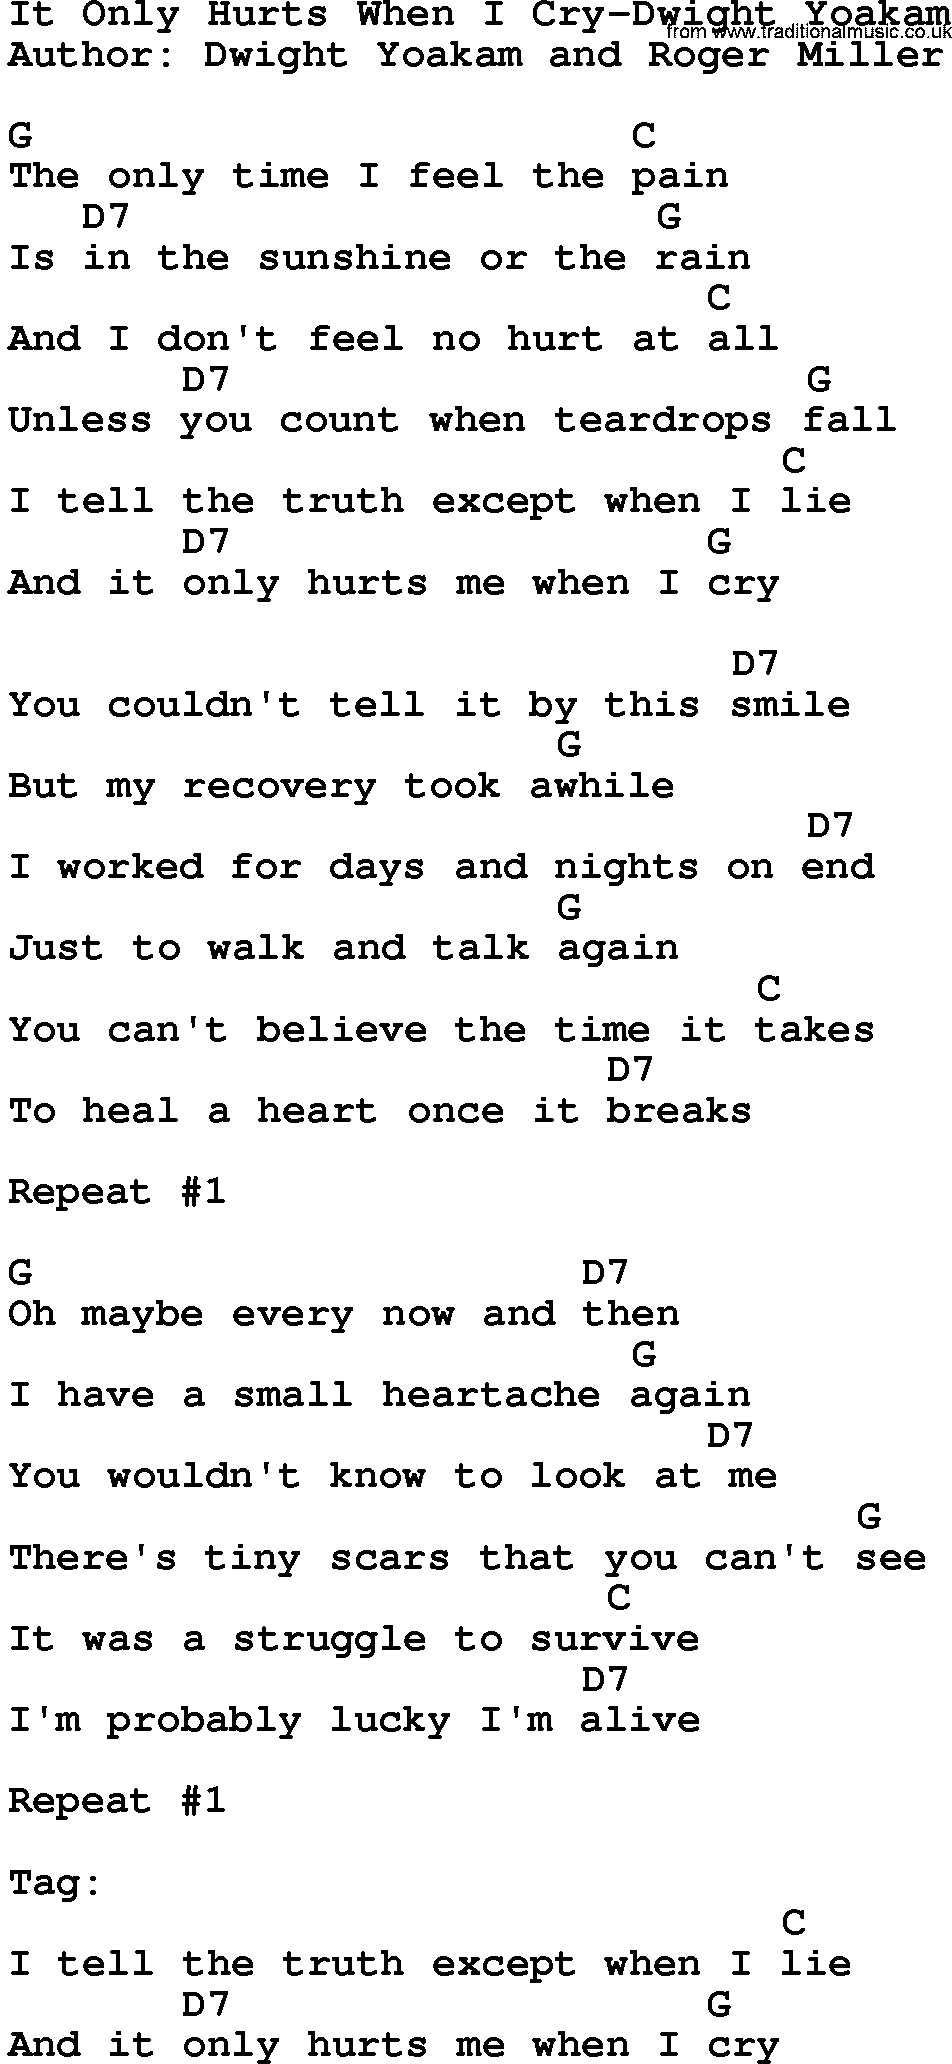 Country music song: It Only Hurts When I Cry-Dwight Yoakam lyrics and chords